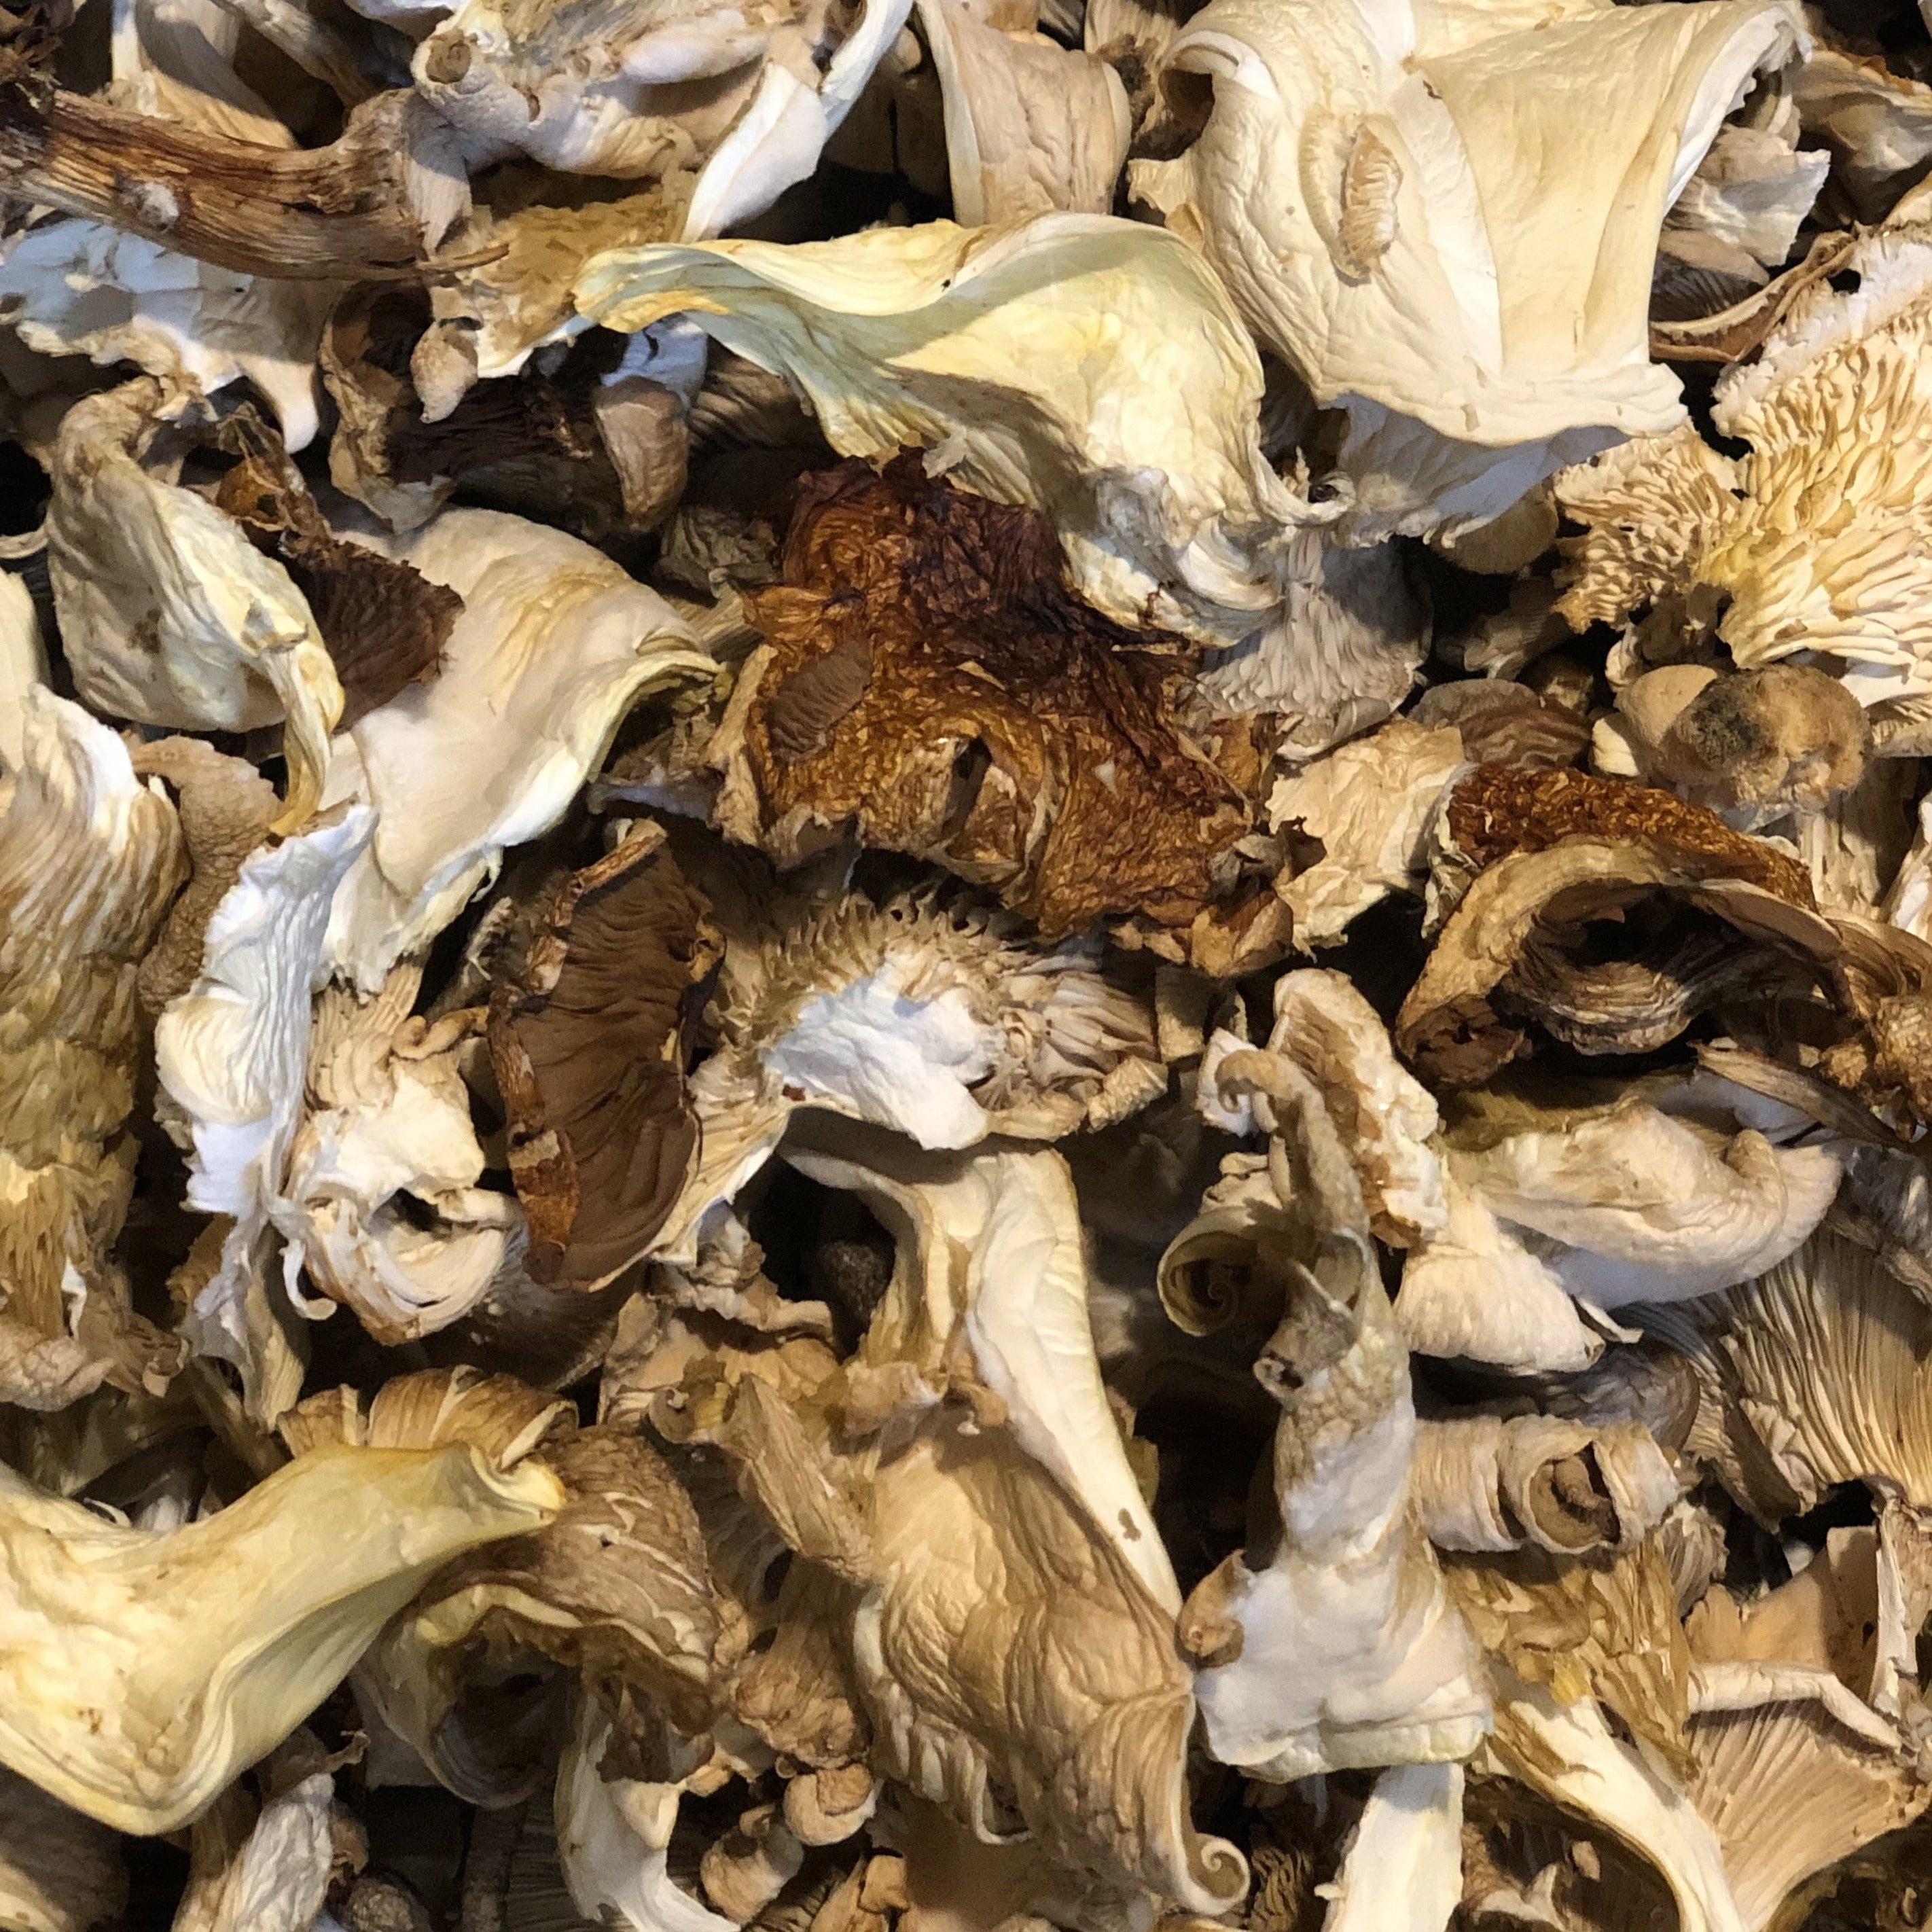 Mushrooms, Dried Forest Medley (approx 40g)